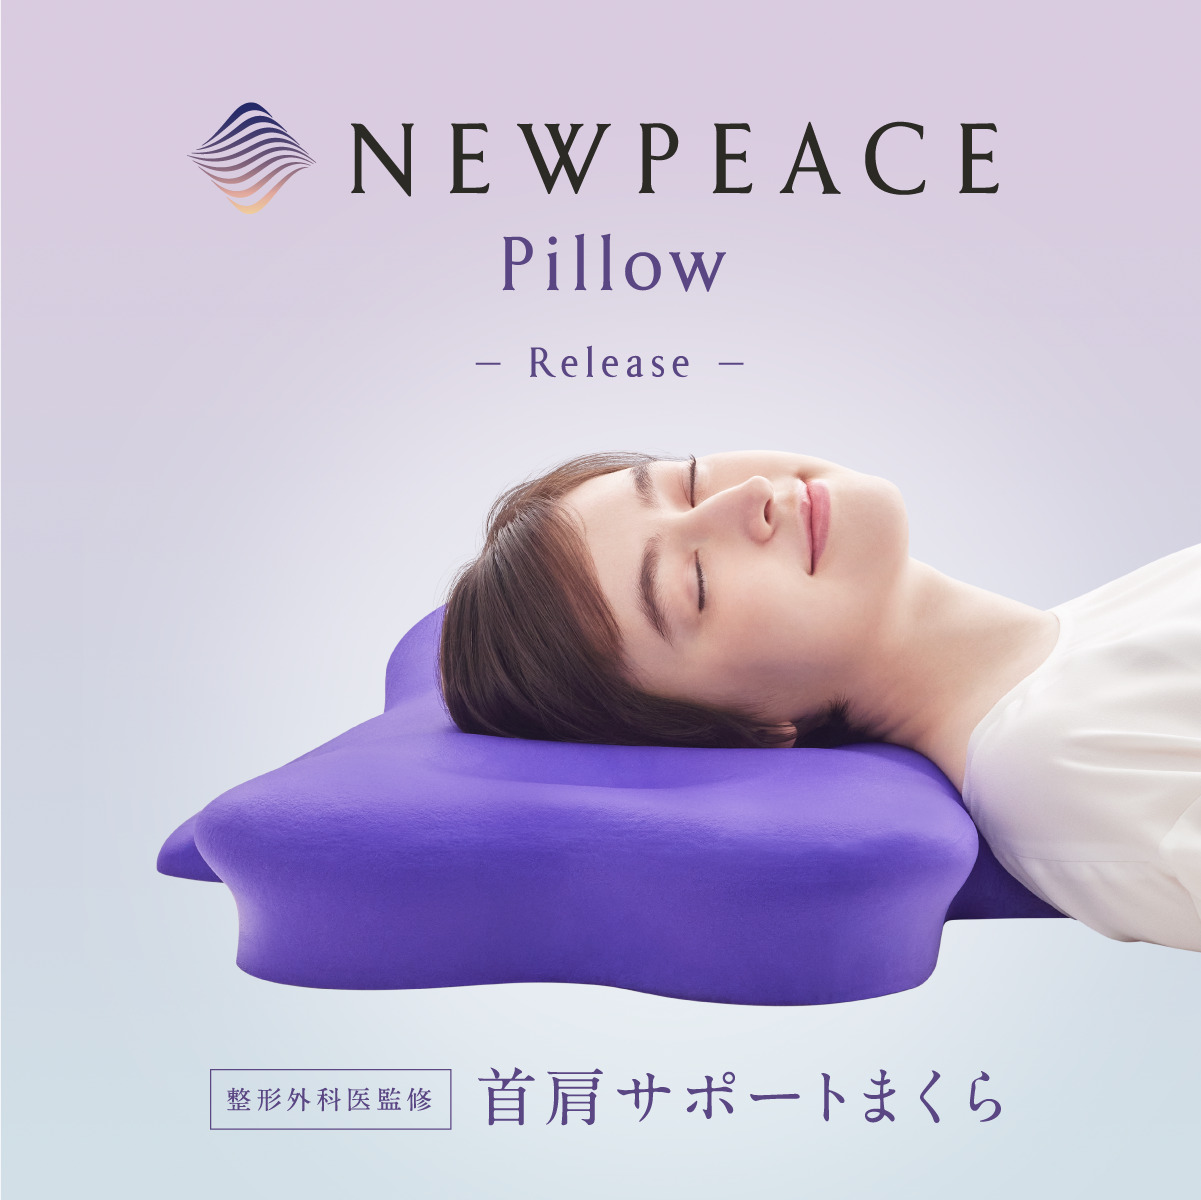 NEWPEACE Pillow Releaseのサムネイル